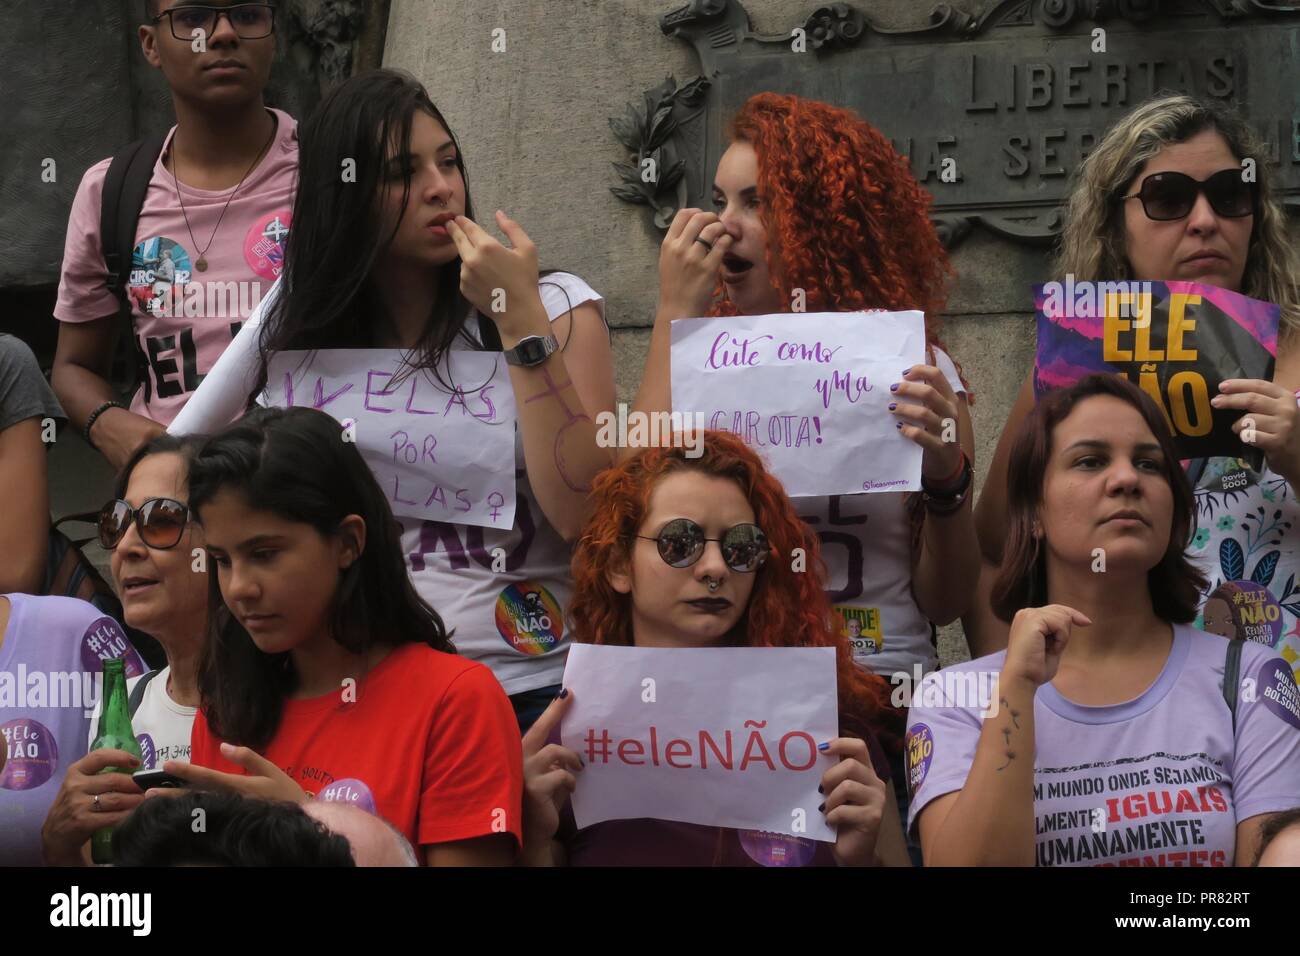 Rio de Janeiro, Brazil, September 29th 2018. Demonstration against right-wing presidential candidate Jair Bolsonaro in Rio de Janeiro, one of many nationwide protests today. A campaign named #EleNao (#NotHim) was initiated in social media by women against Bolsonaro's misogynist, racist and homophobic remarks. Credit: Maria Adelaide Silva/Alamy Live News Stock Photo